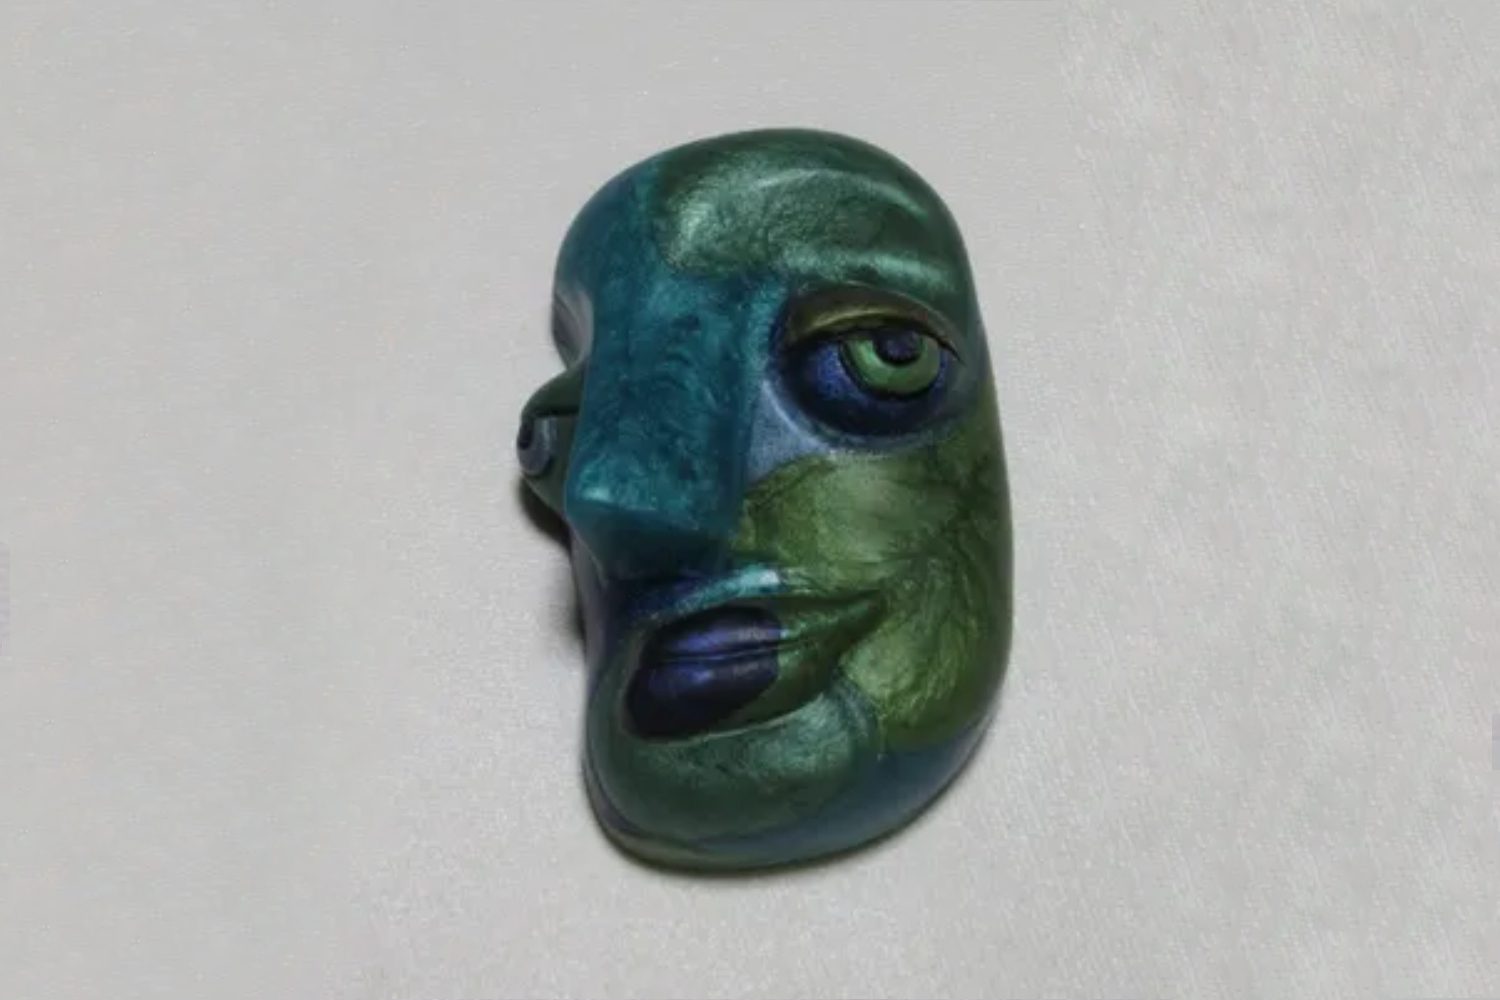 A green and blue face with eyes on it.